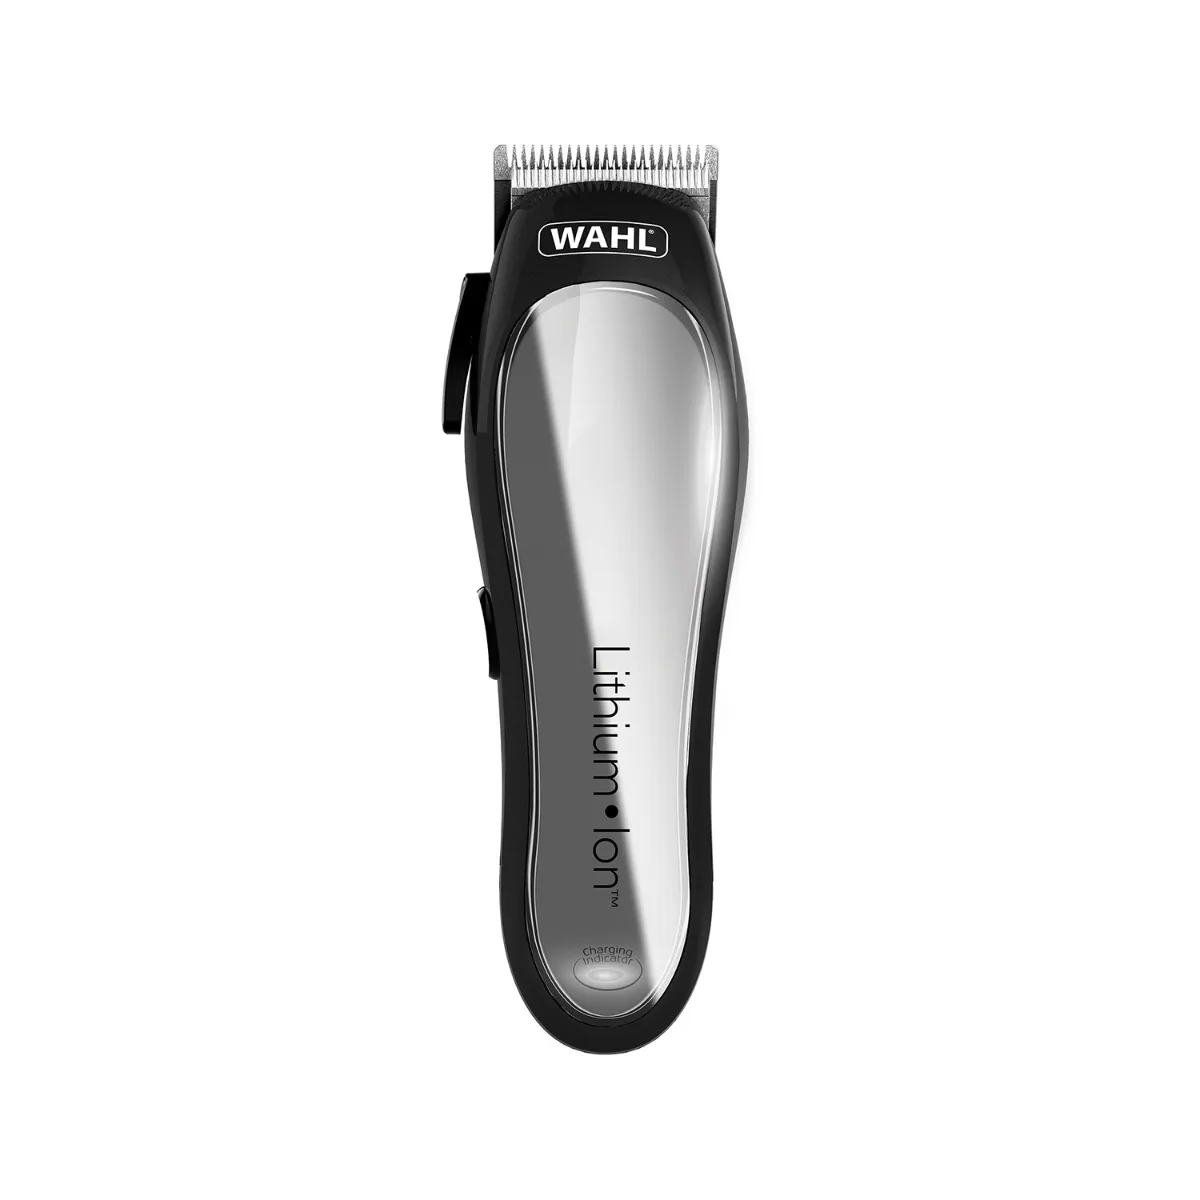 WAHL 79600-3116 Lithium Ion Clipper